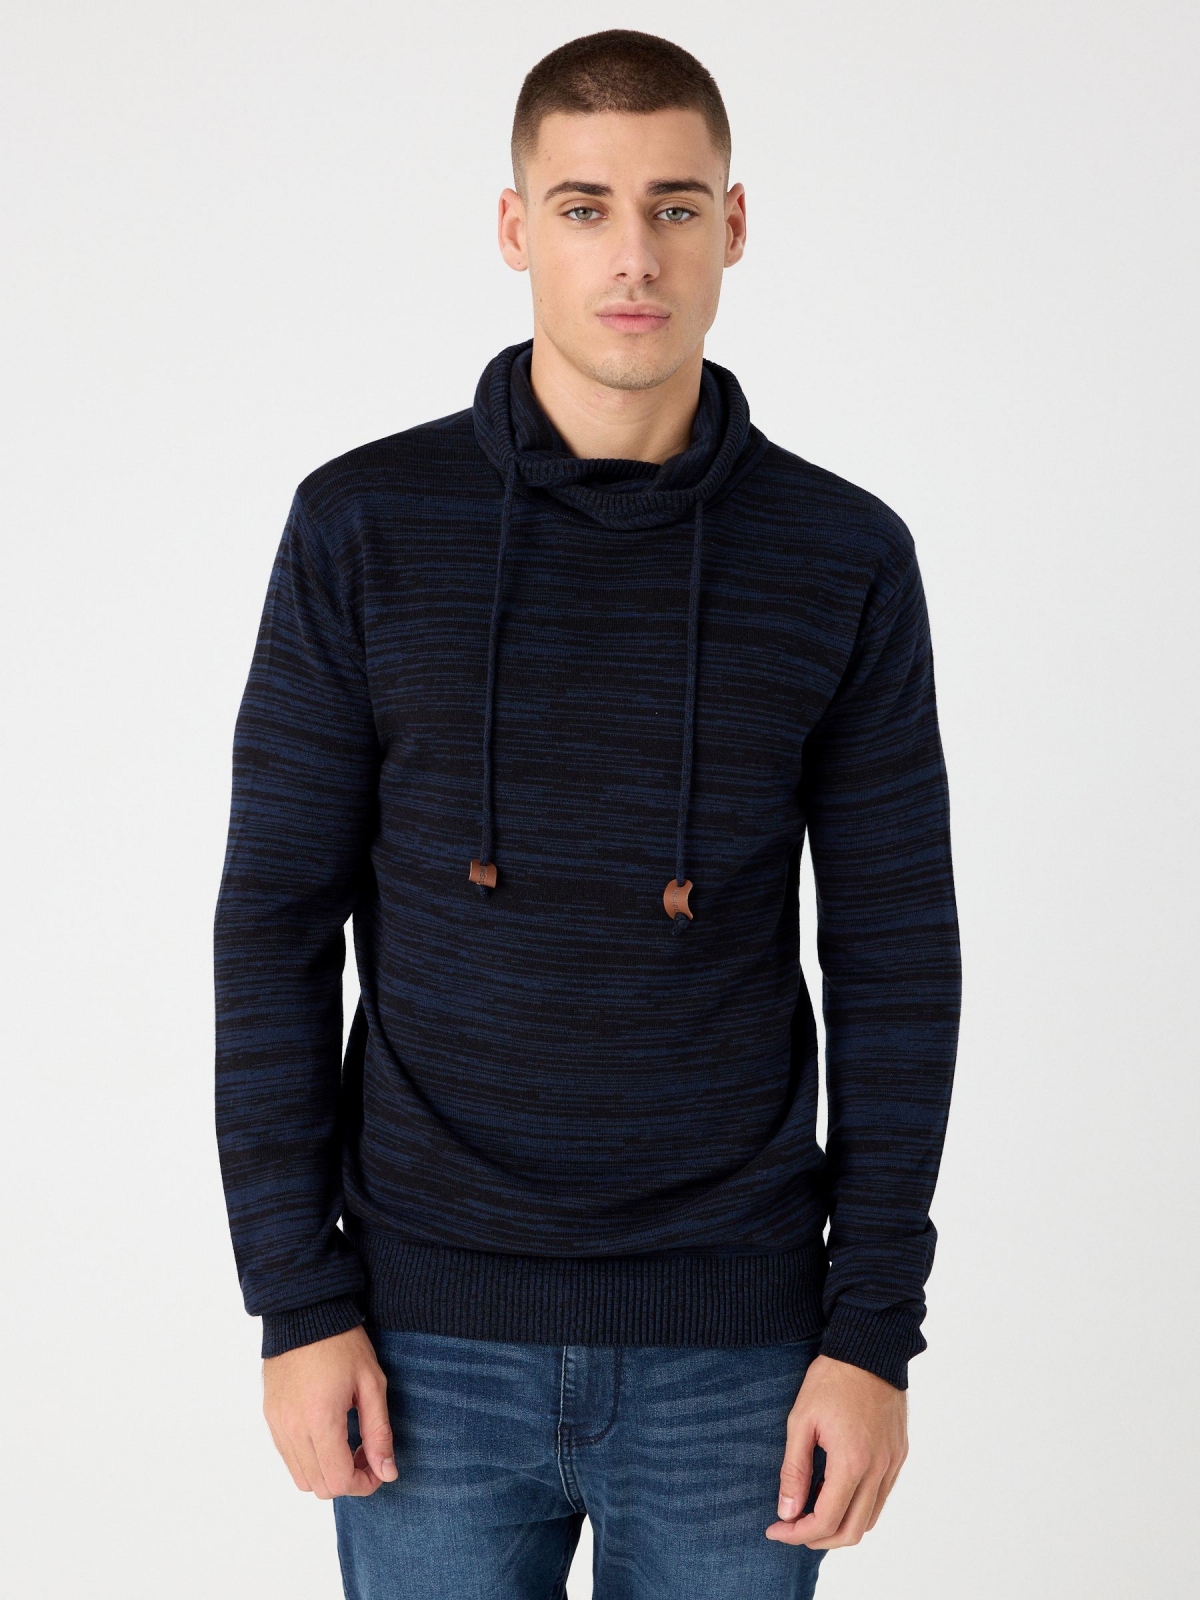 Fleece turtleneck sweater blue middle front view